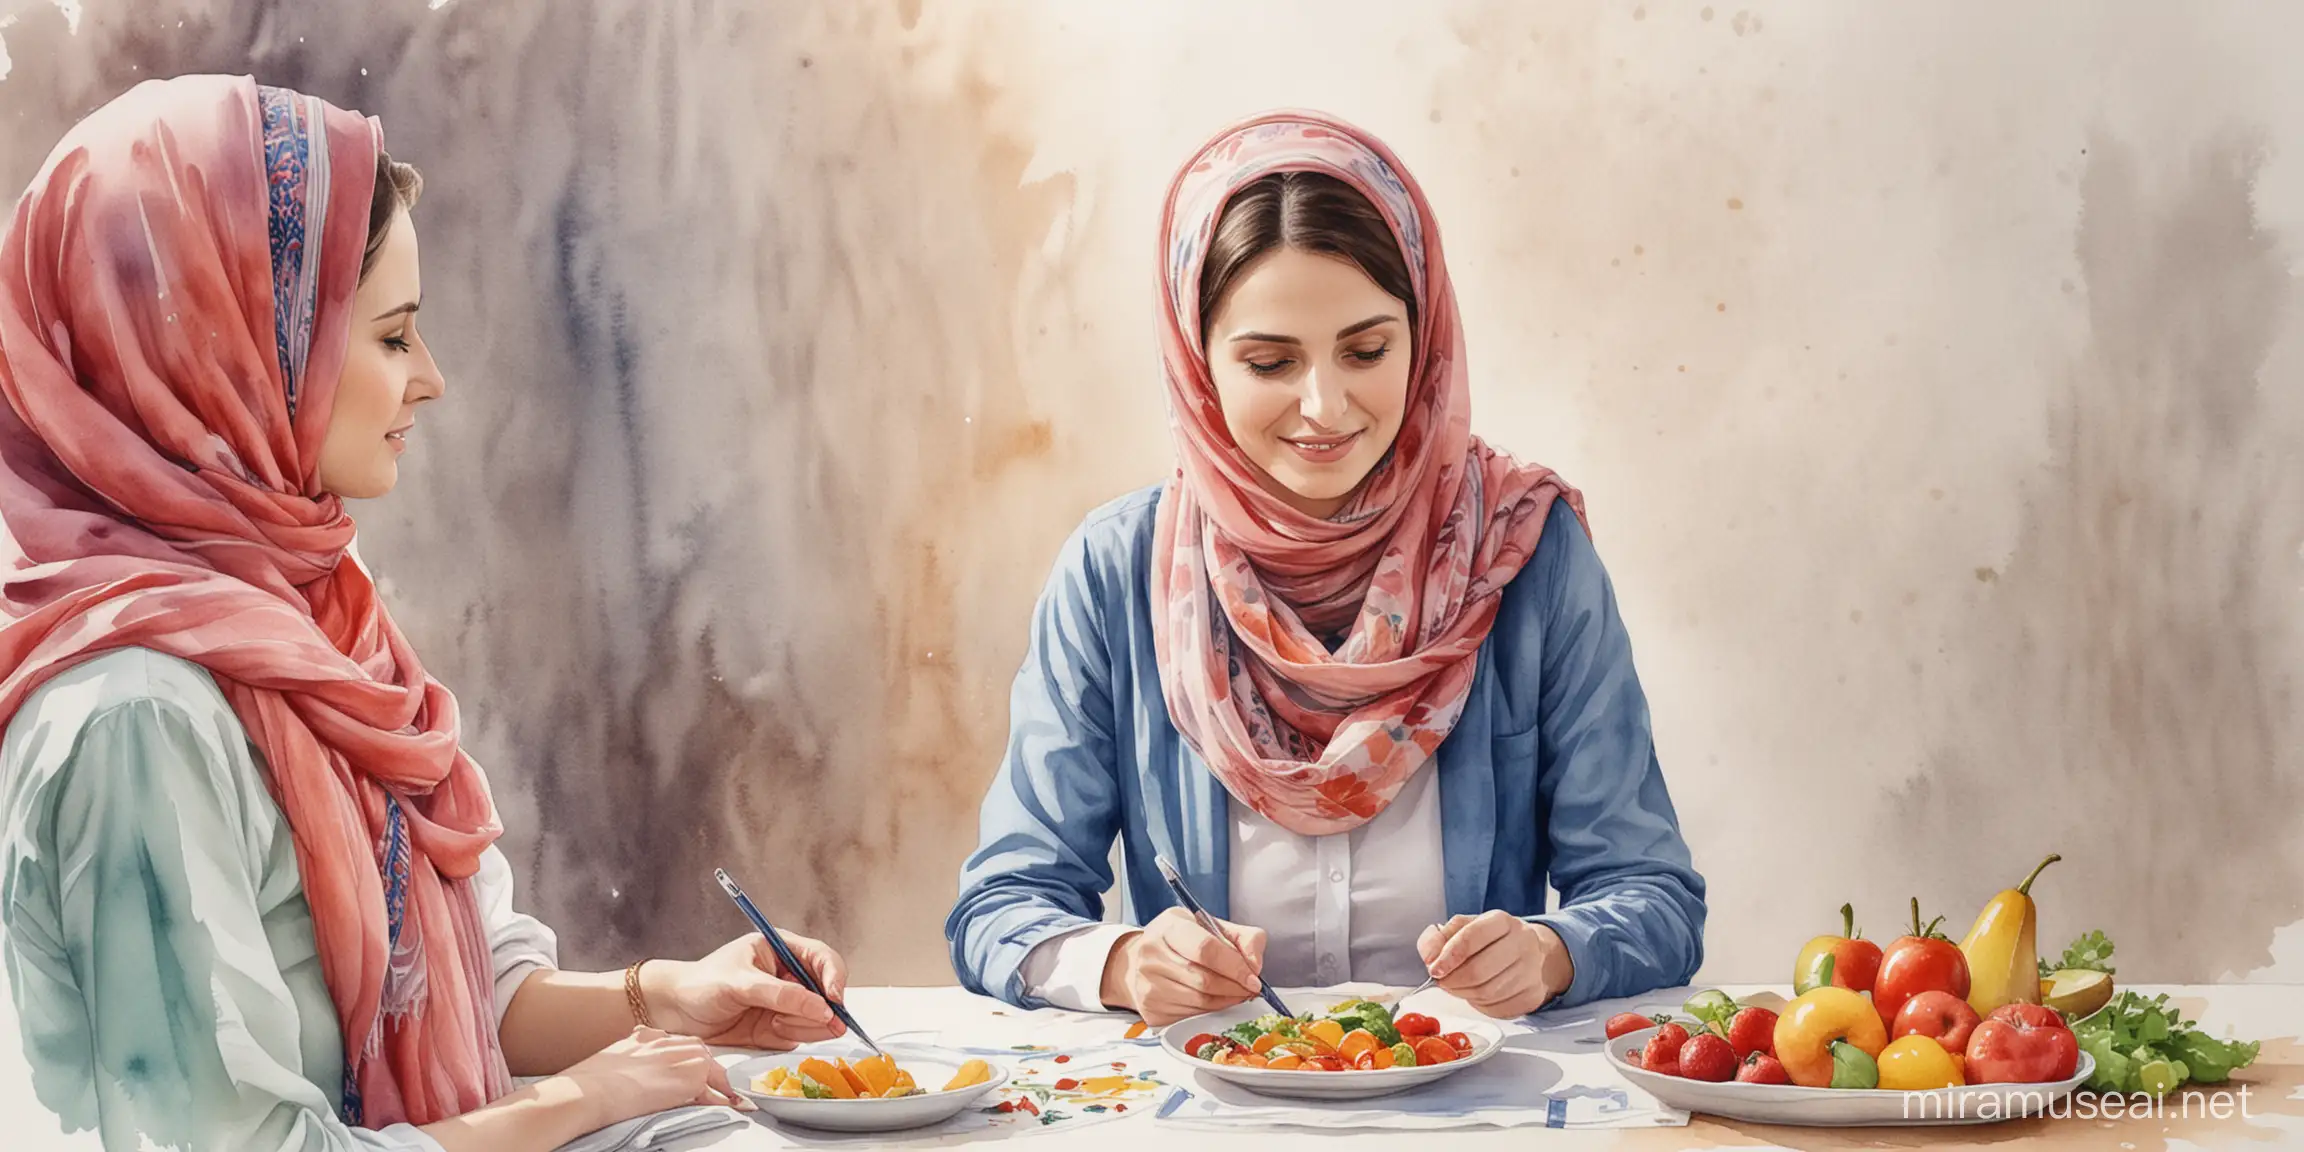 a consulting session with a nutritionist. the image is a watercolor image. The woman in the image is wearing a scarf like Muslims.